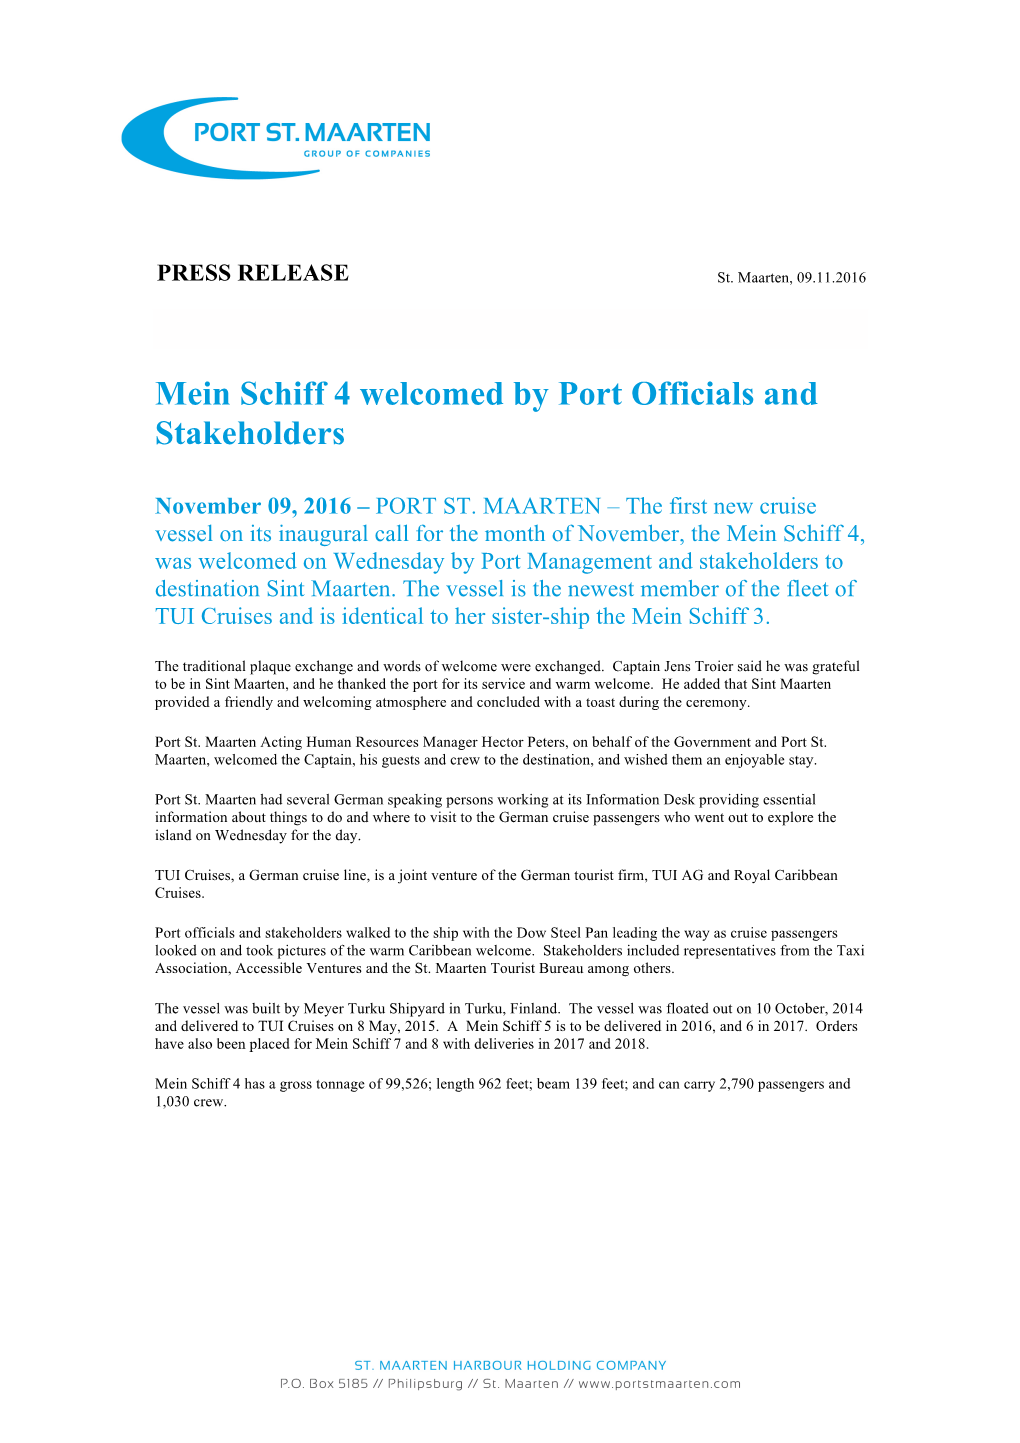 Mein Schiff 4 Welcomed by Port Officials and Stakeholders